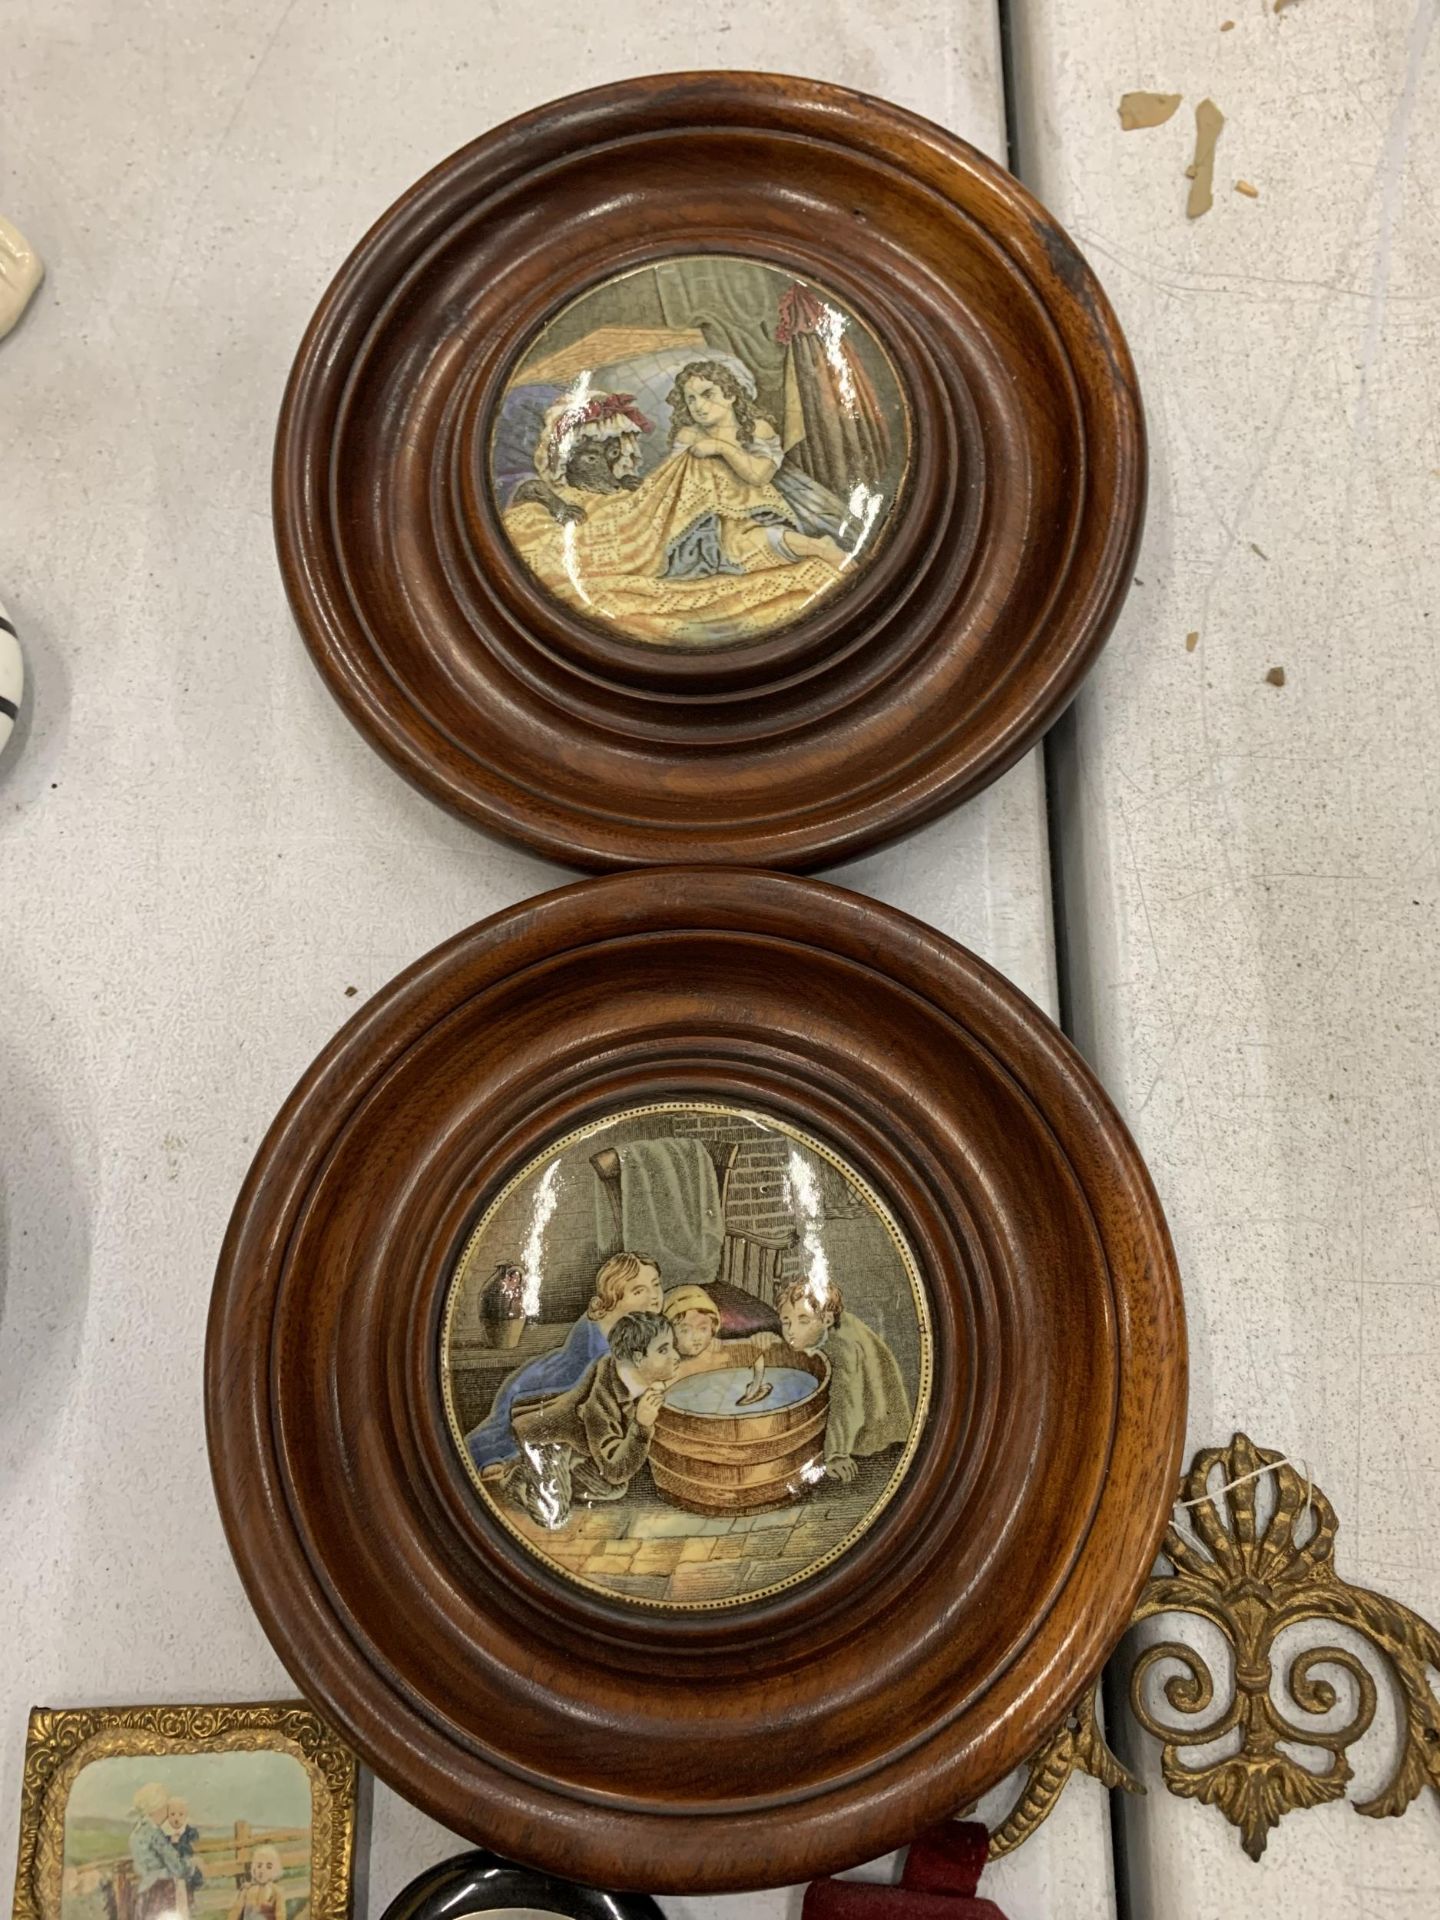 TWO PRATTWARE POT LIDS IN ROUND MAHOGANY FRAMES, IMPRESSED ON THE BACK WITH W. W. SMITH, PLUS A - Image 2 of 4